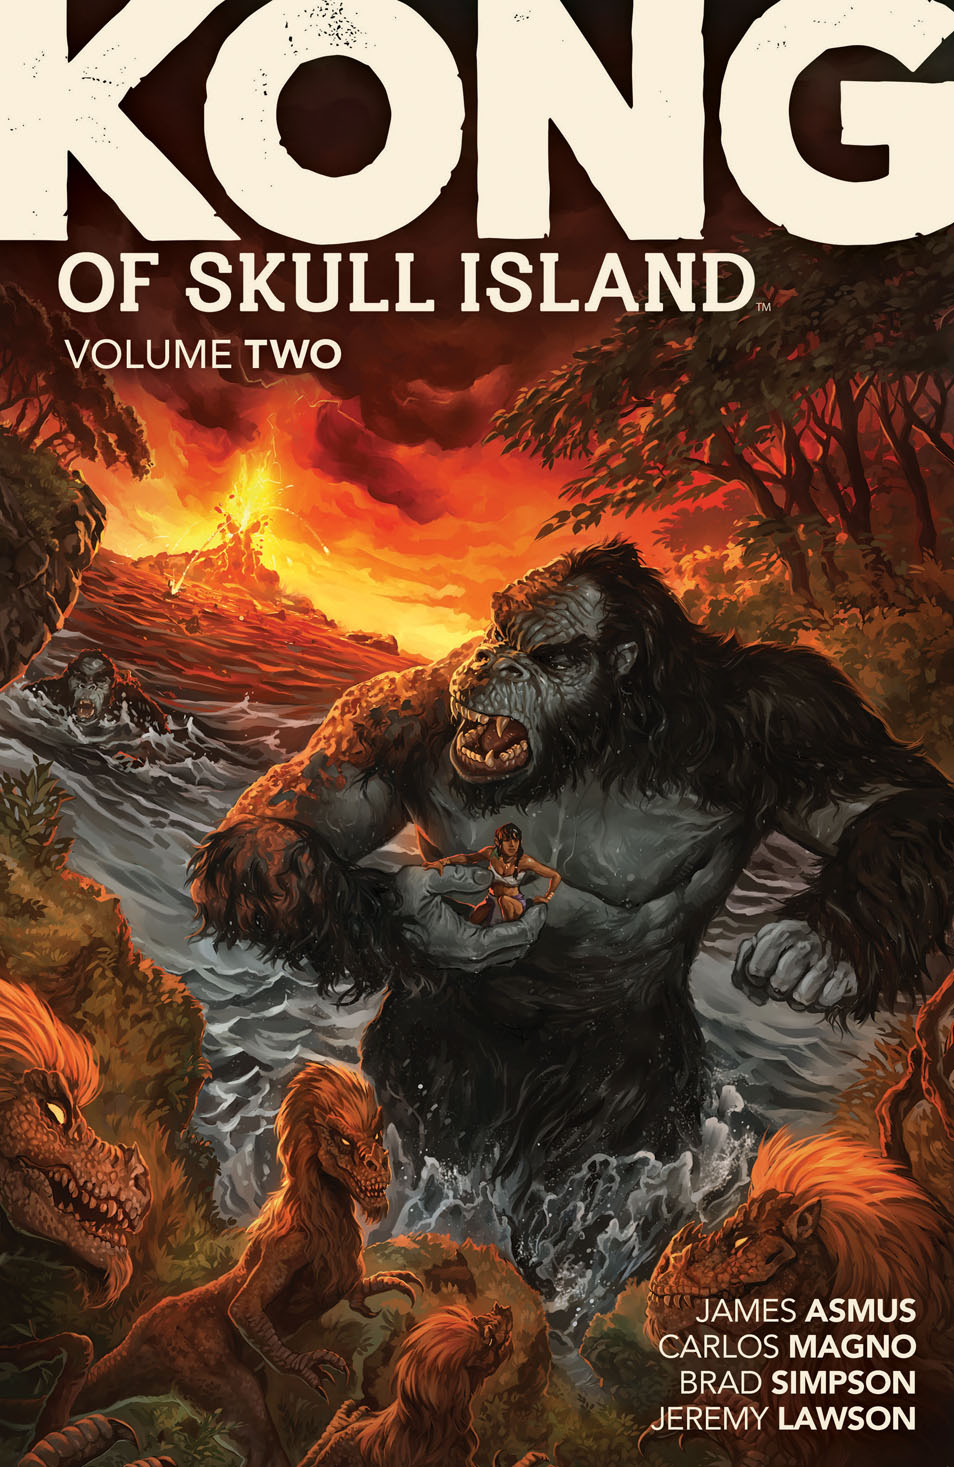 This image is the cover for the book Kong of Skull Island Vol. 2, Kong of Skull Island